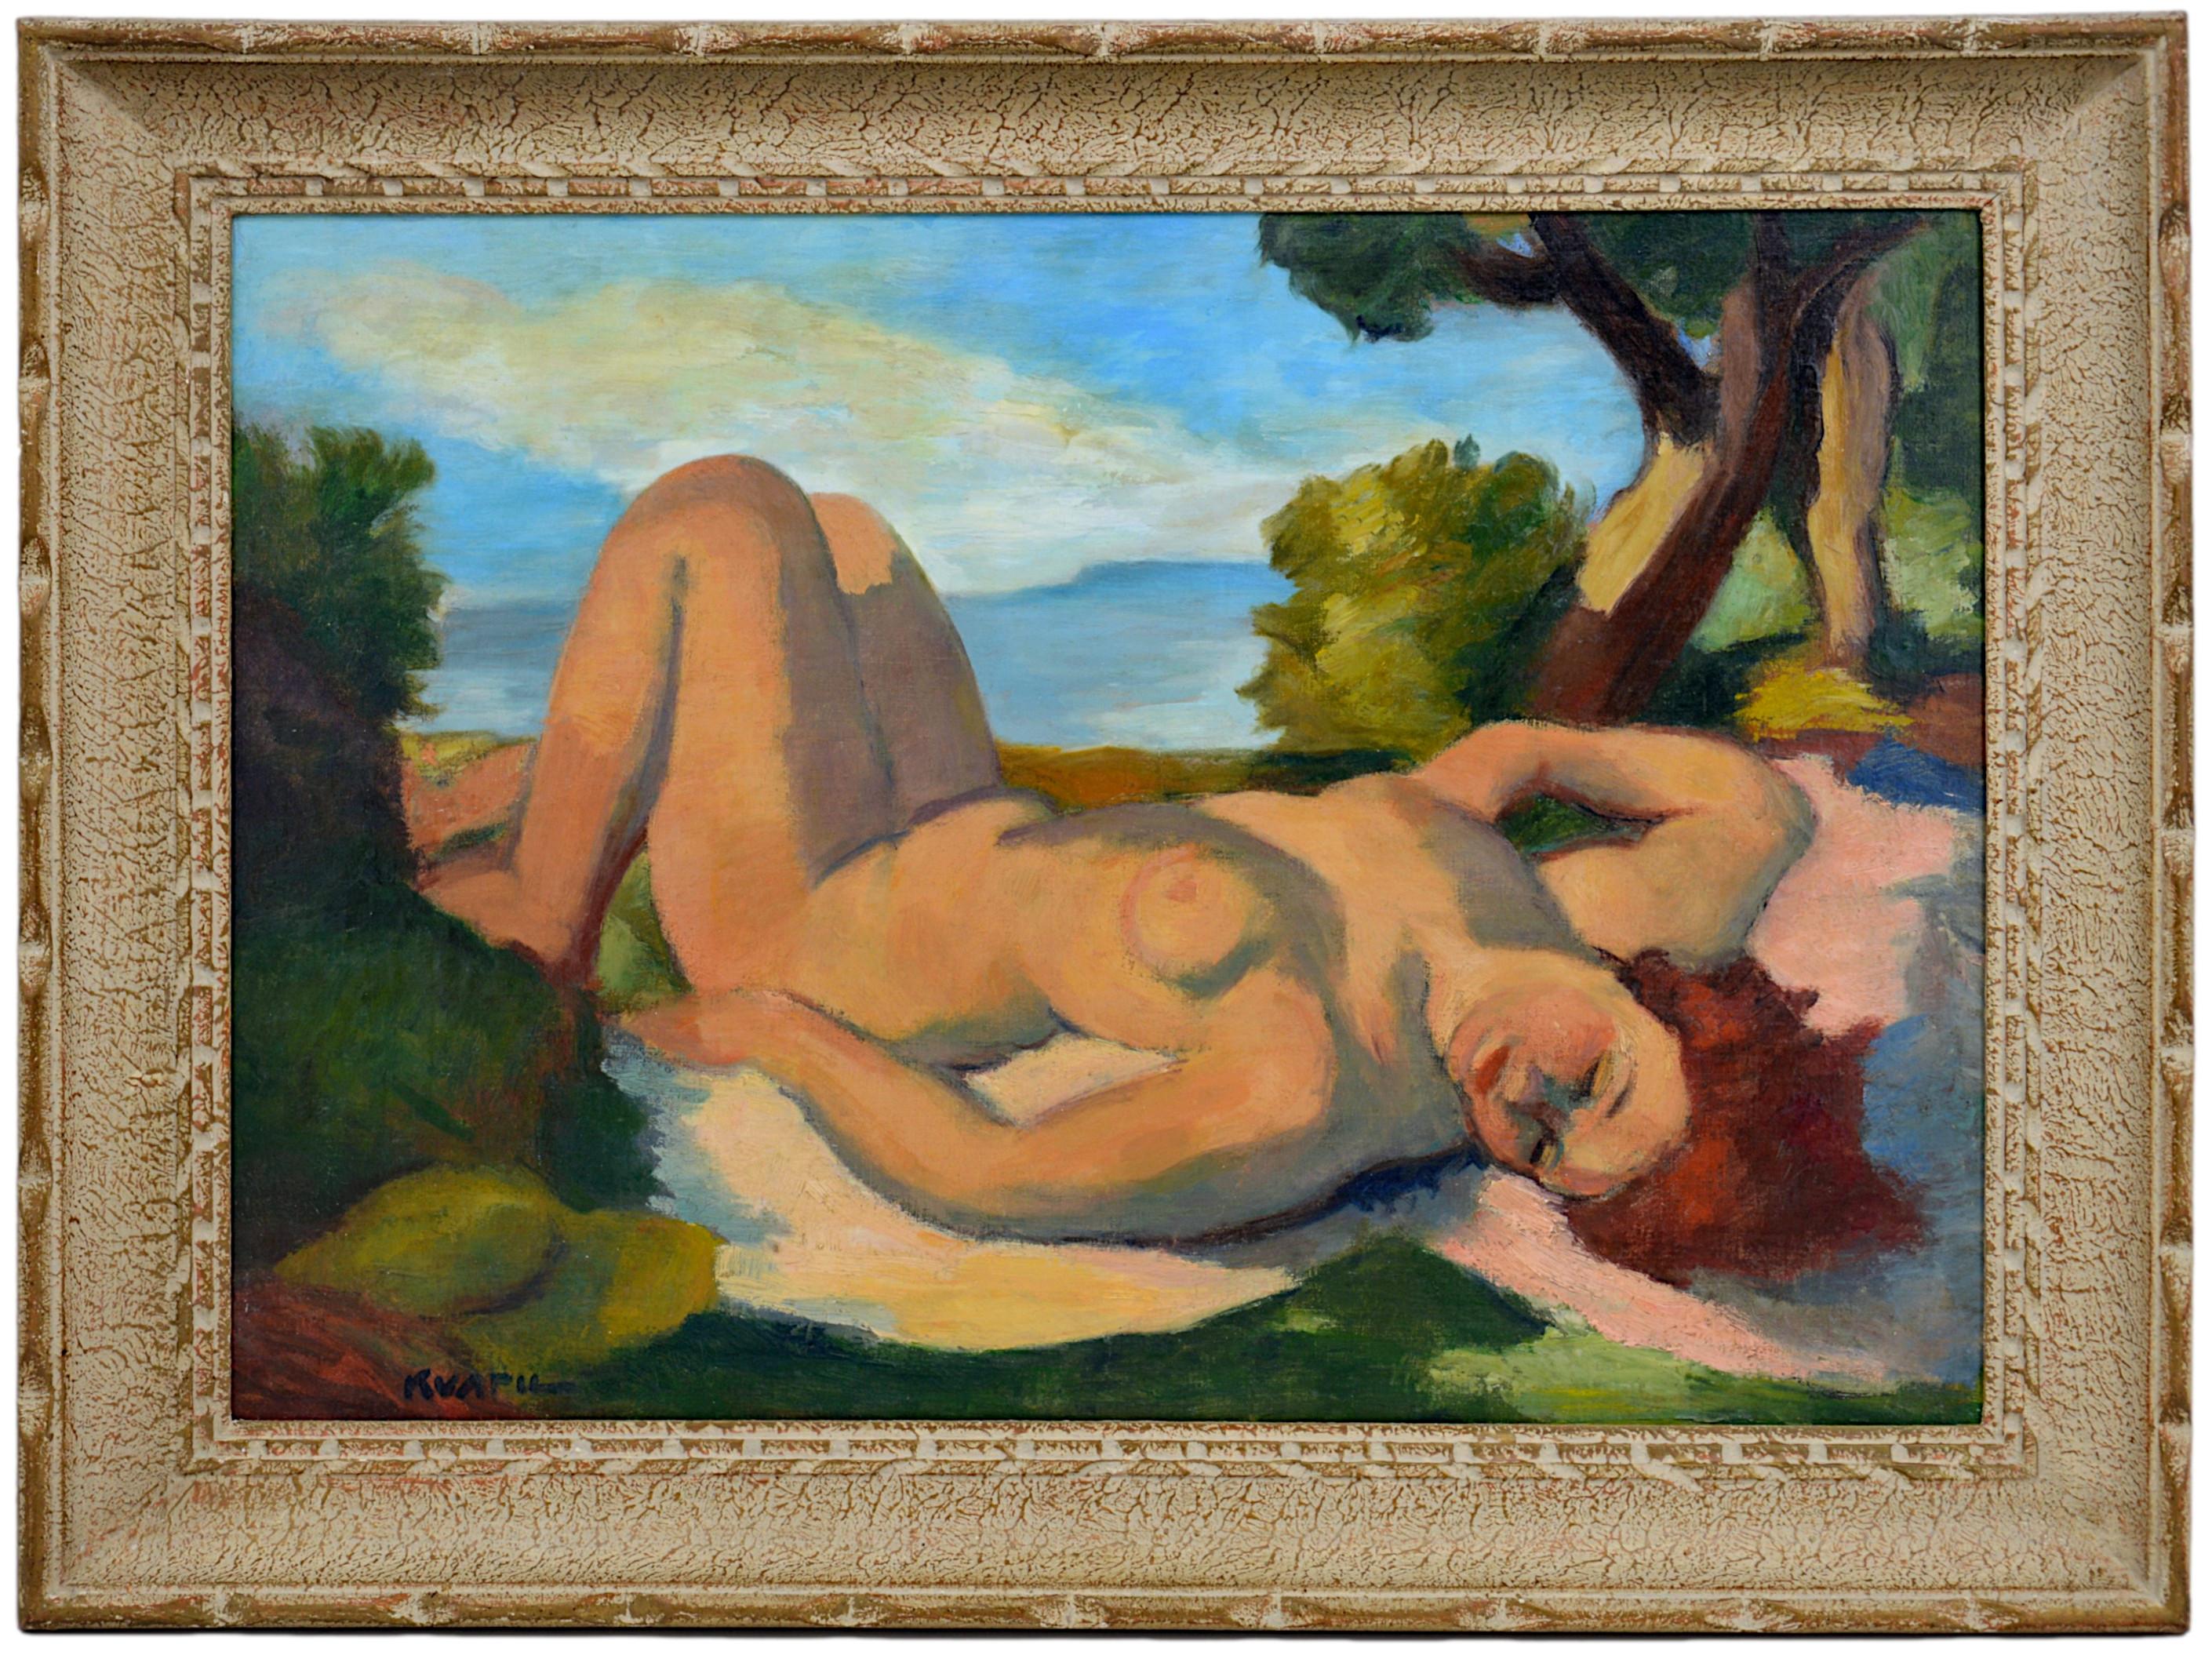 Oil on canvas by Charles Kvapil, France, ca.1920. "On the edge of the lake". with frame: 78x58.5x6 cm - 30.7x23x2.4 inches - without frame: 65x46 cm - 25.6x18.1 inches. 15M format. Signed lower left "Kvapil"

Charles Kvapil was born in